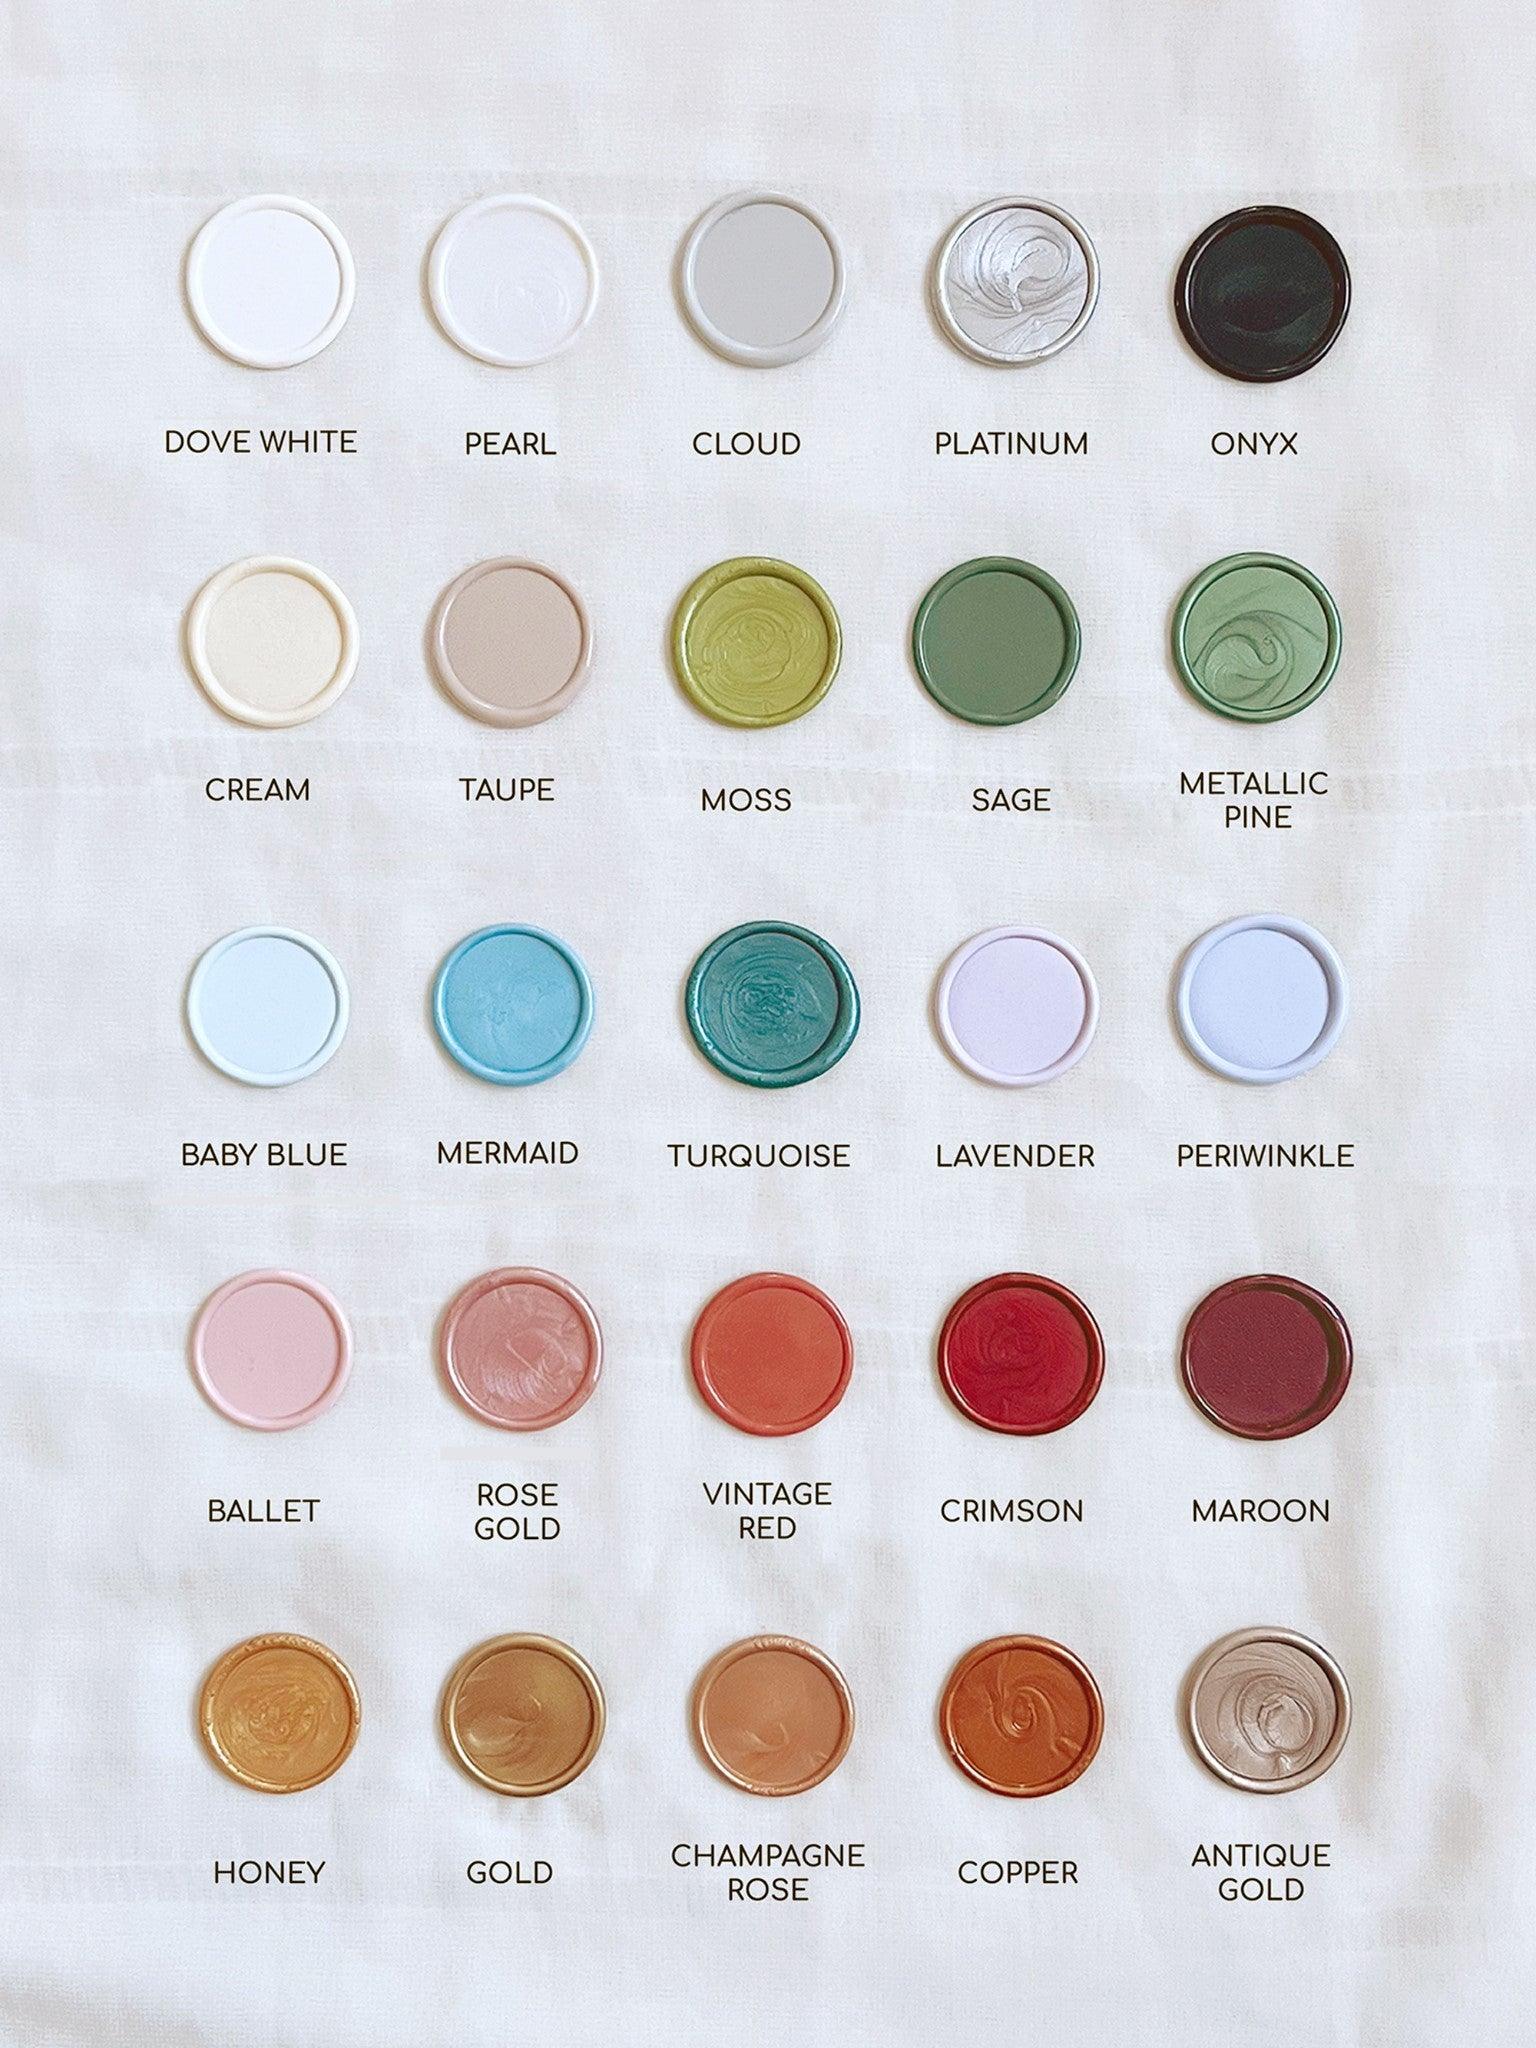 Made of Honour wax seal colour chart containing variations of white, off-white, silver, black, green, blue, purple, pink, red, and gold.